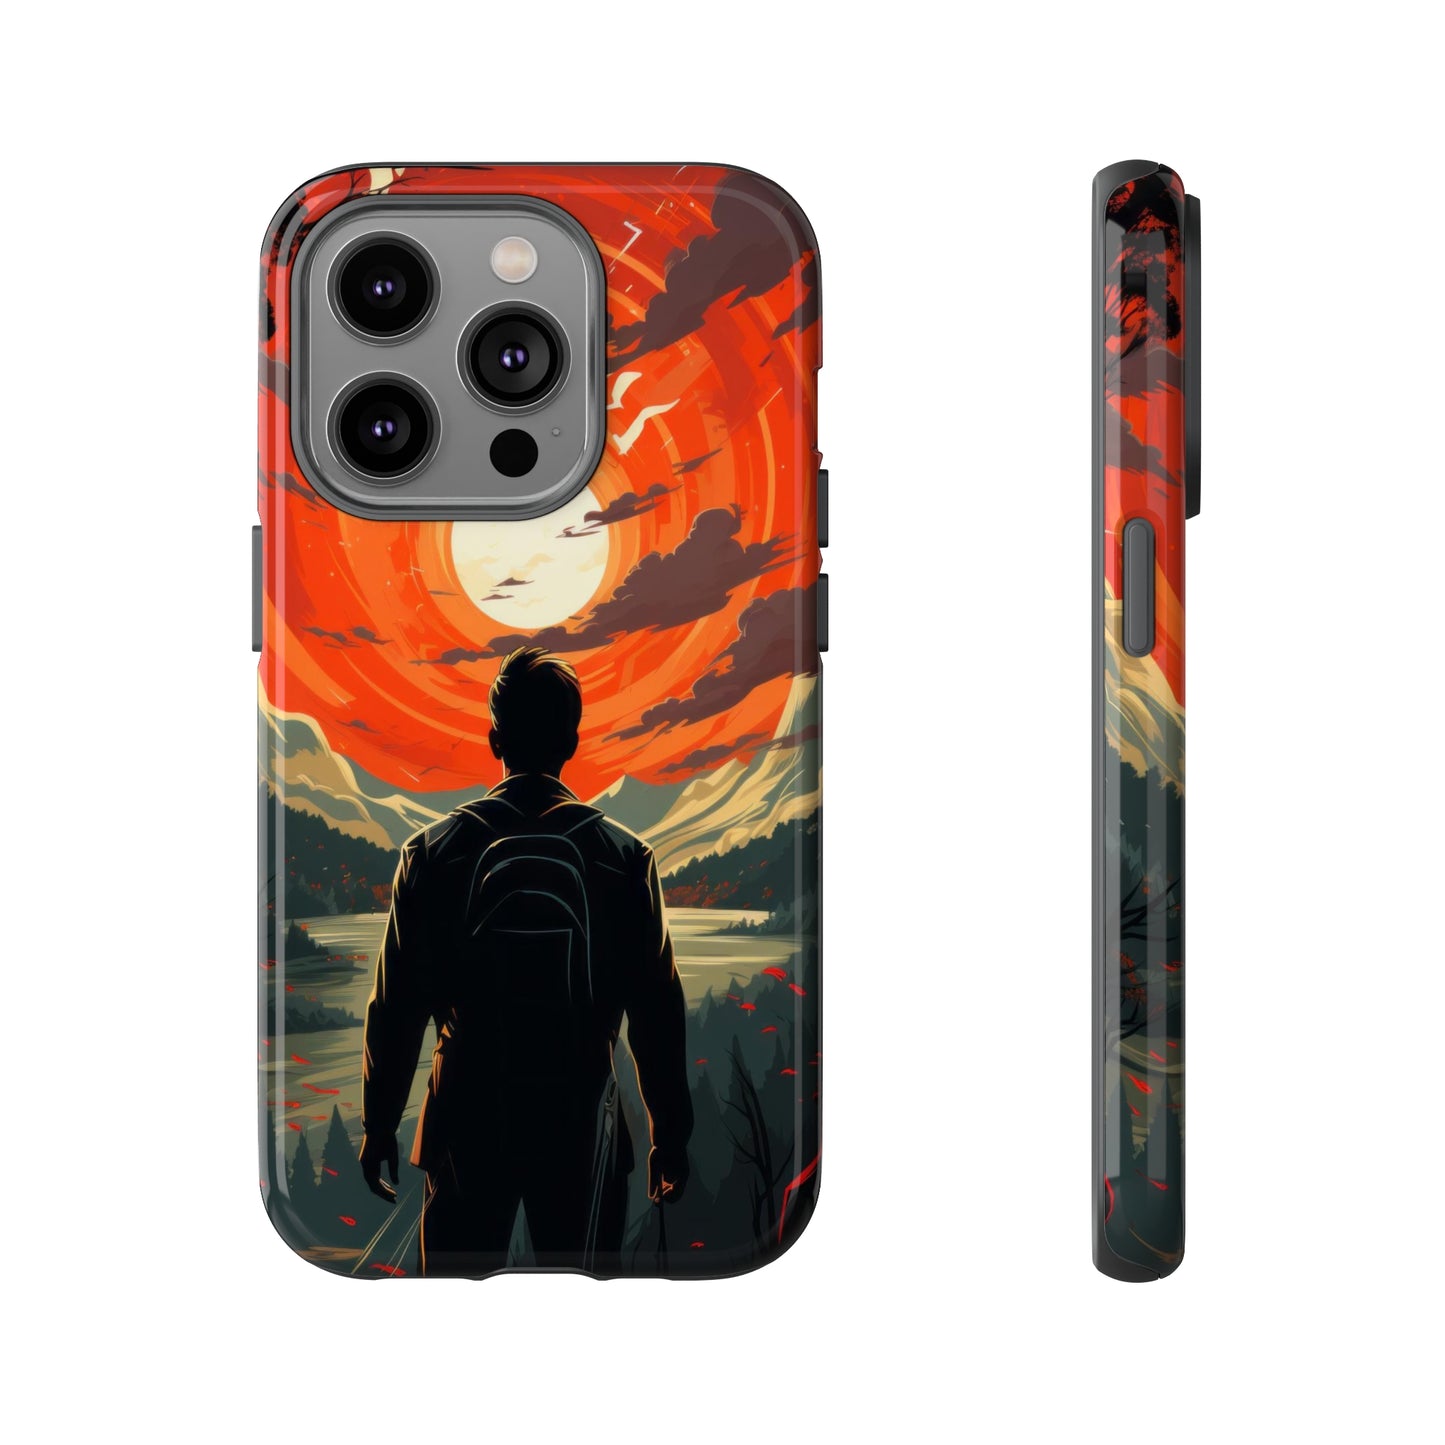 Sunset Contemplation: Man's Silhouette by Lakeside Phone Case for iPhone, Samsung, Pixel